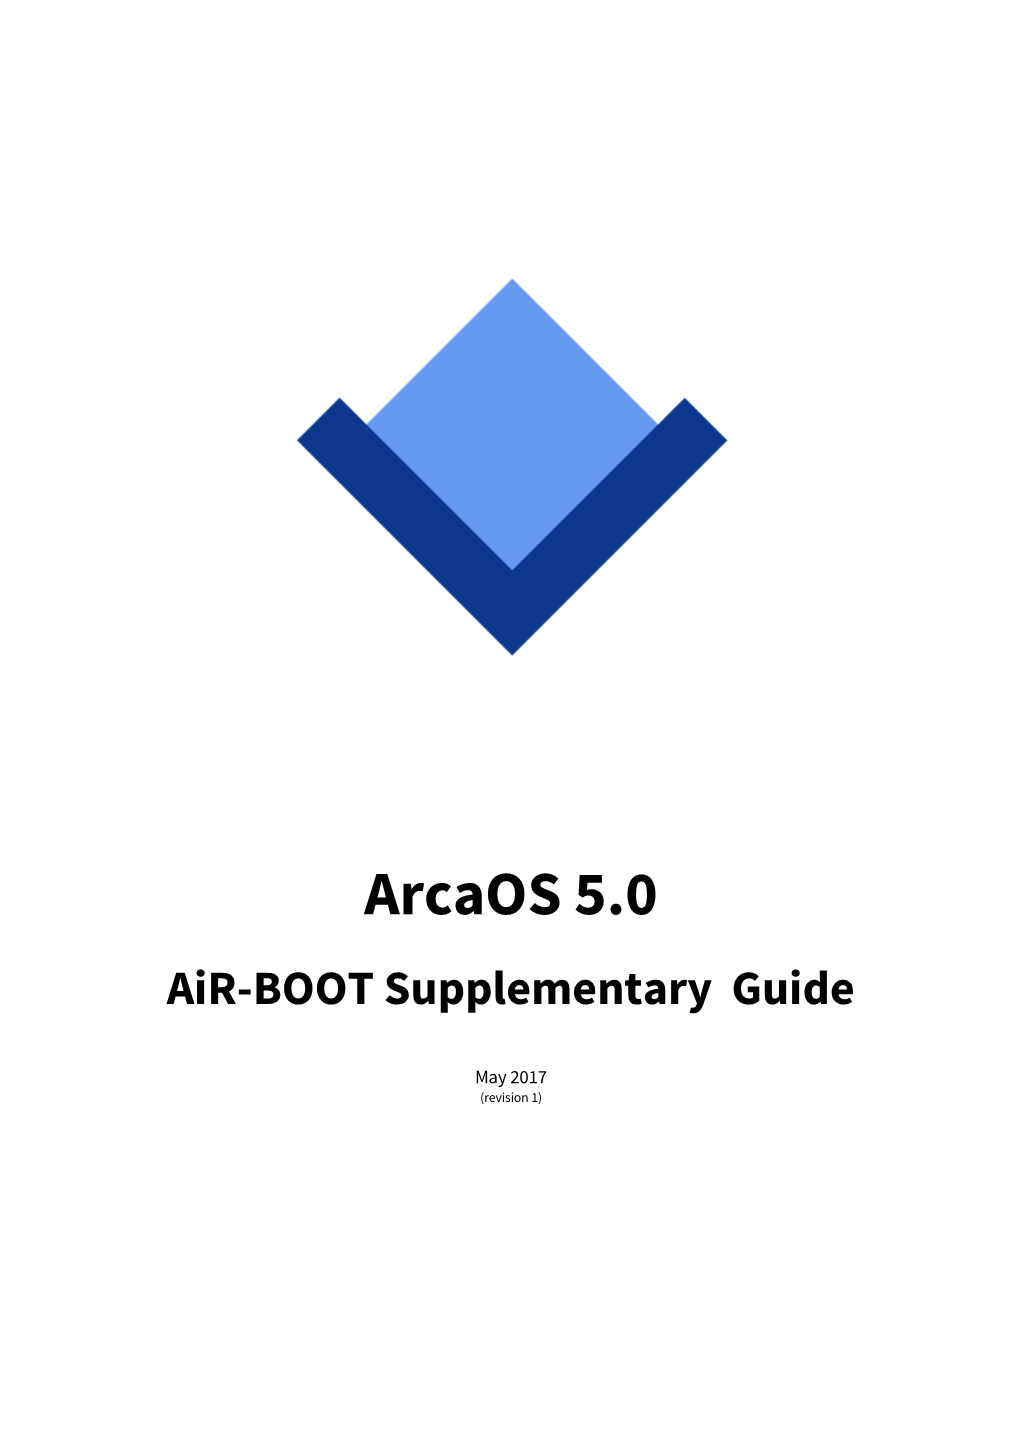 Arcaos 5.0 Air-BOOT Supplementary Guide